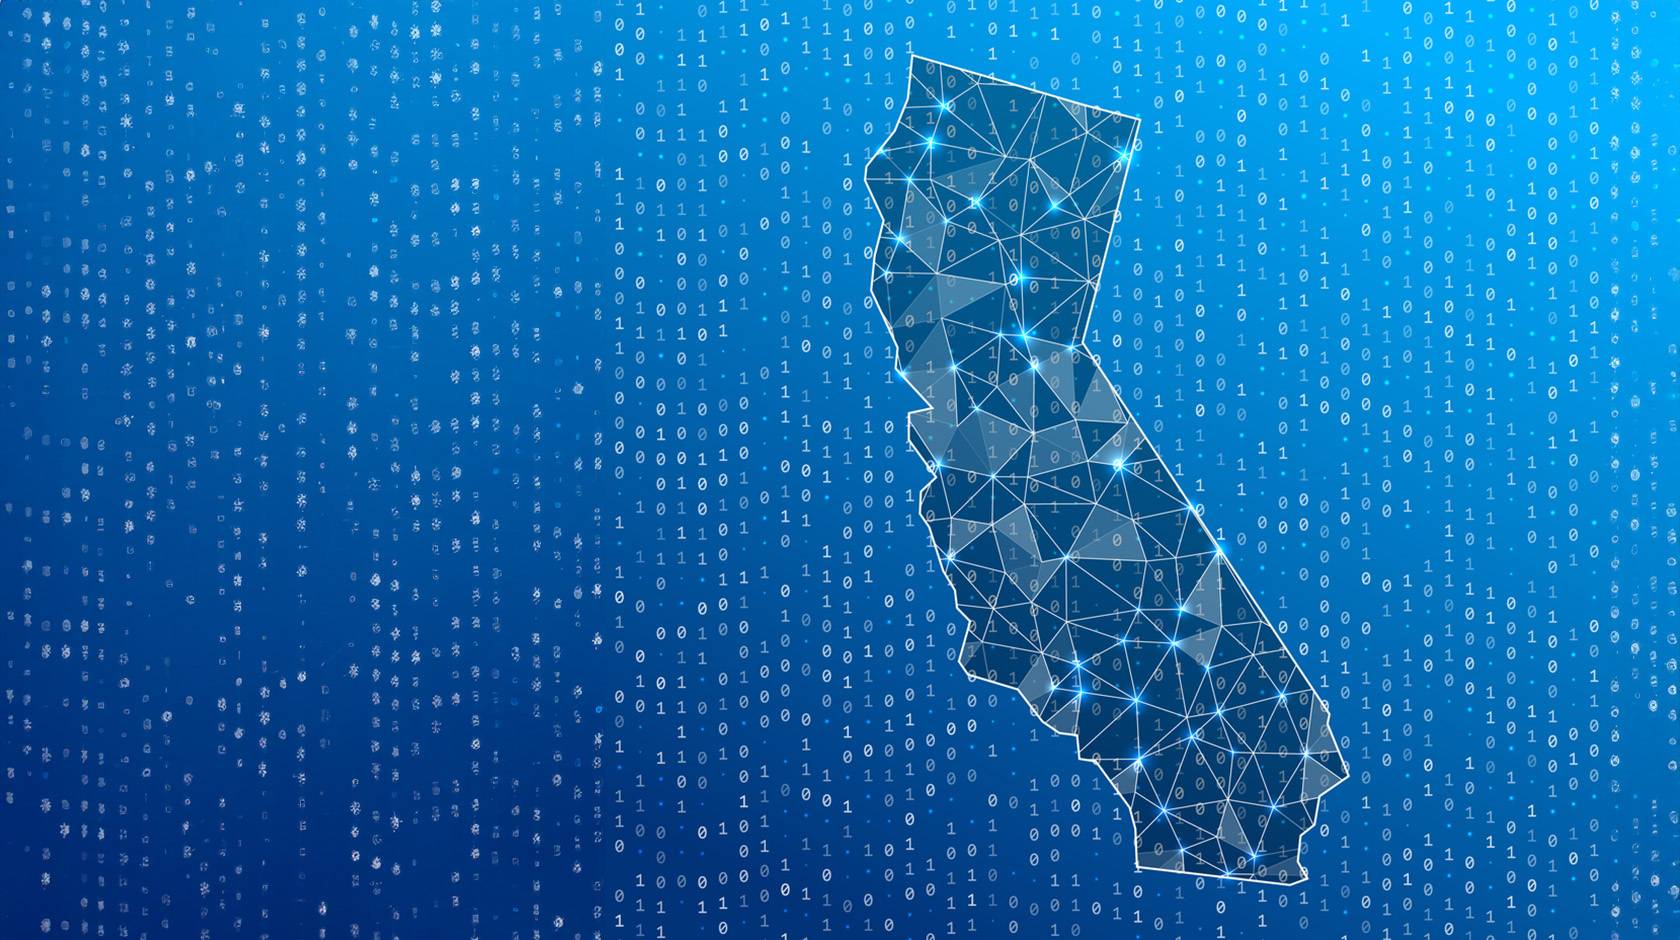 An illustration of a map of California laced with a net of lines connected by glowing nodes floating on a field of 0s and 1s